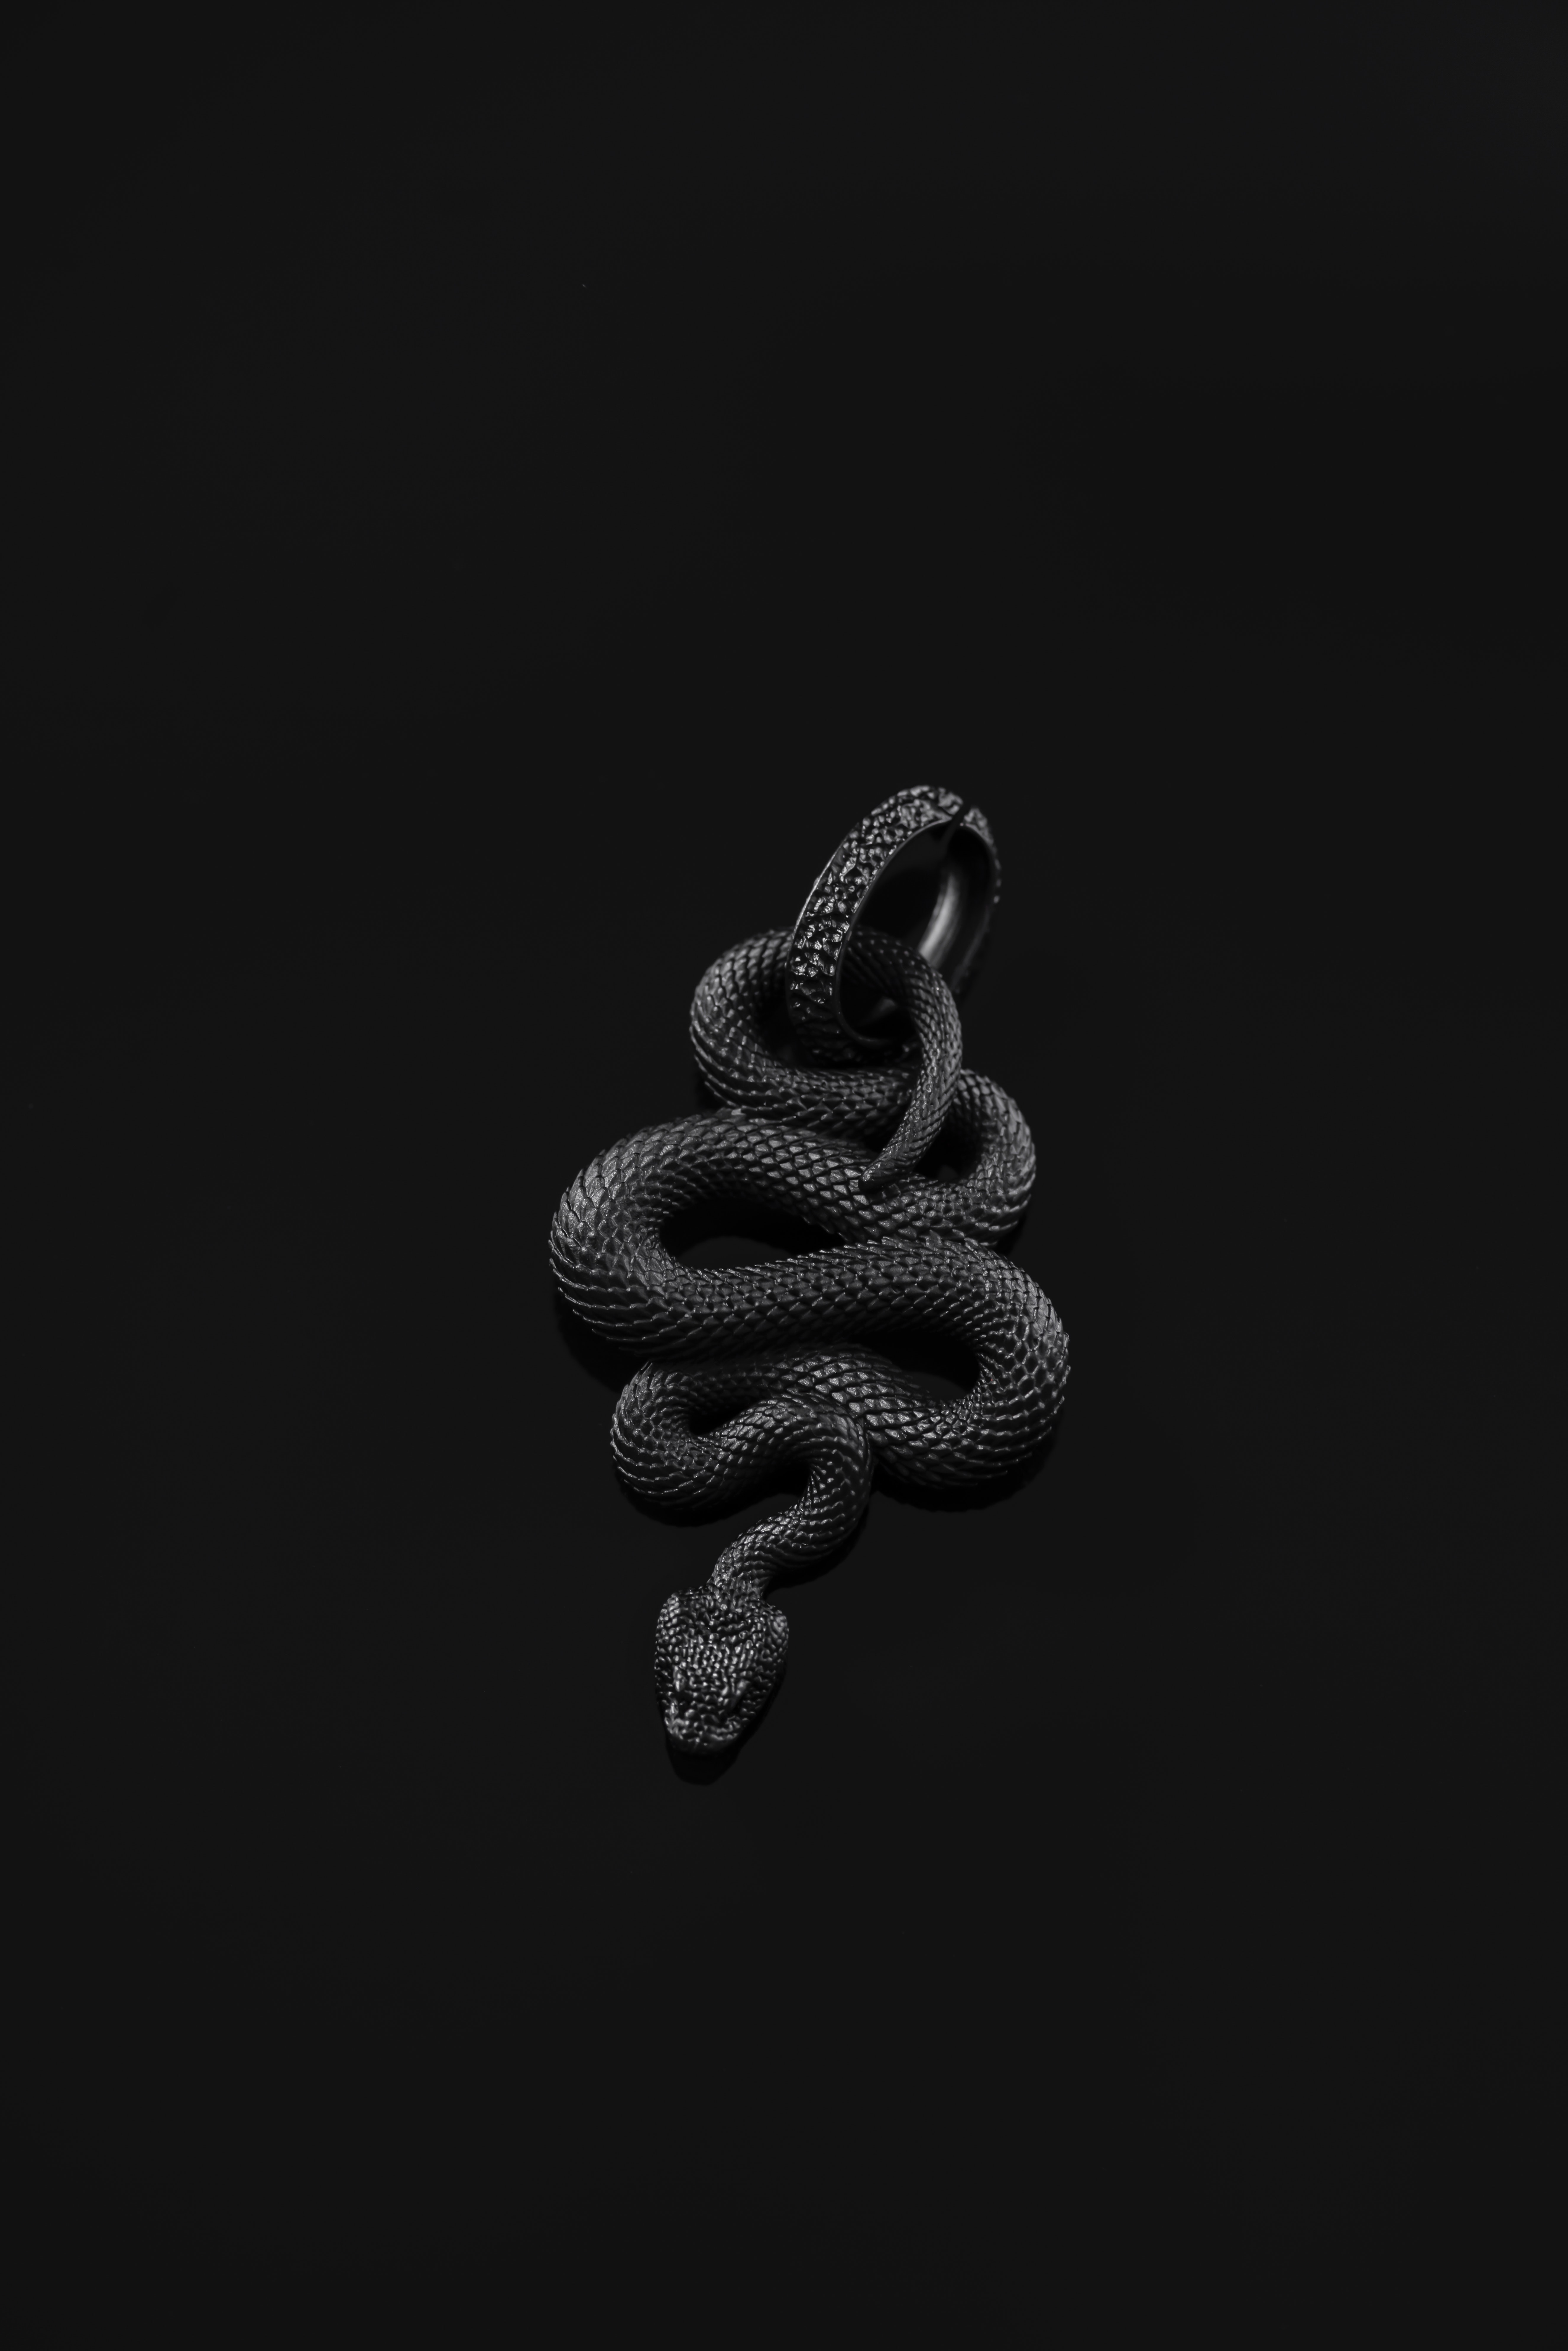 Grayscale Photo of a Snake Pendant · Free